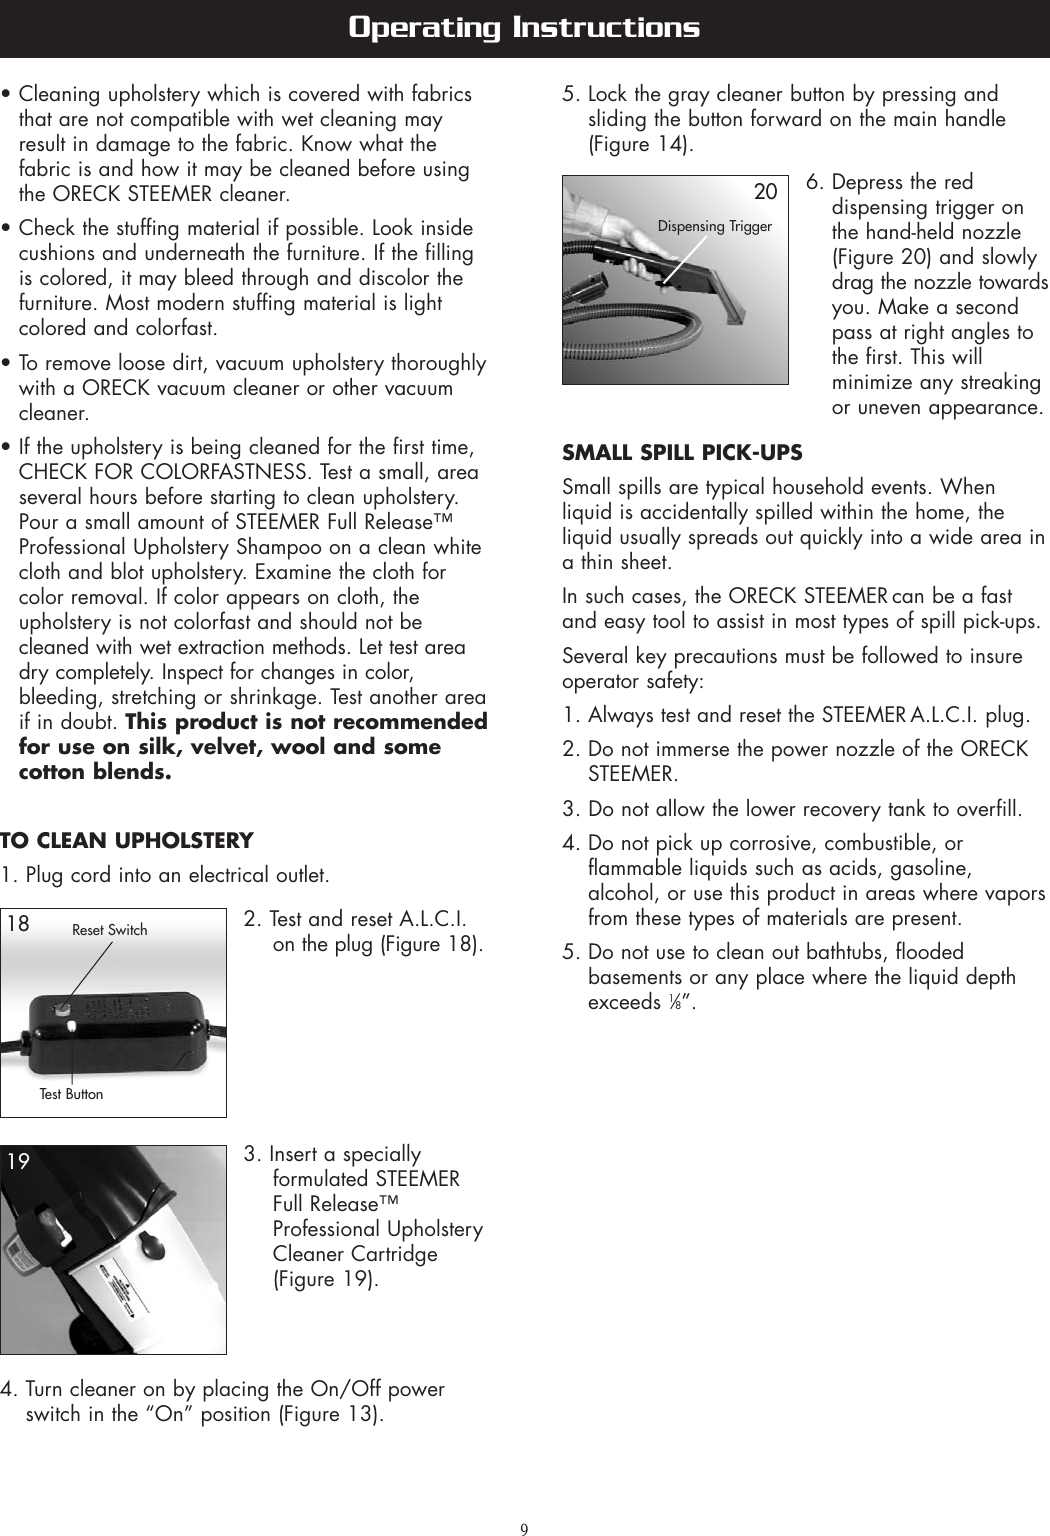 Page 9 of 11 - Oreck Oreck-Xls465-Users-Manual- 53094-03 Rev E Steemer  Oreck-xls465-users-manual